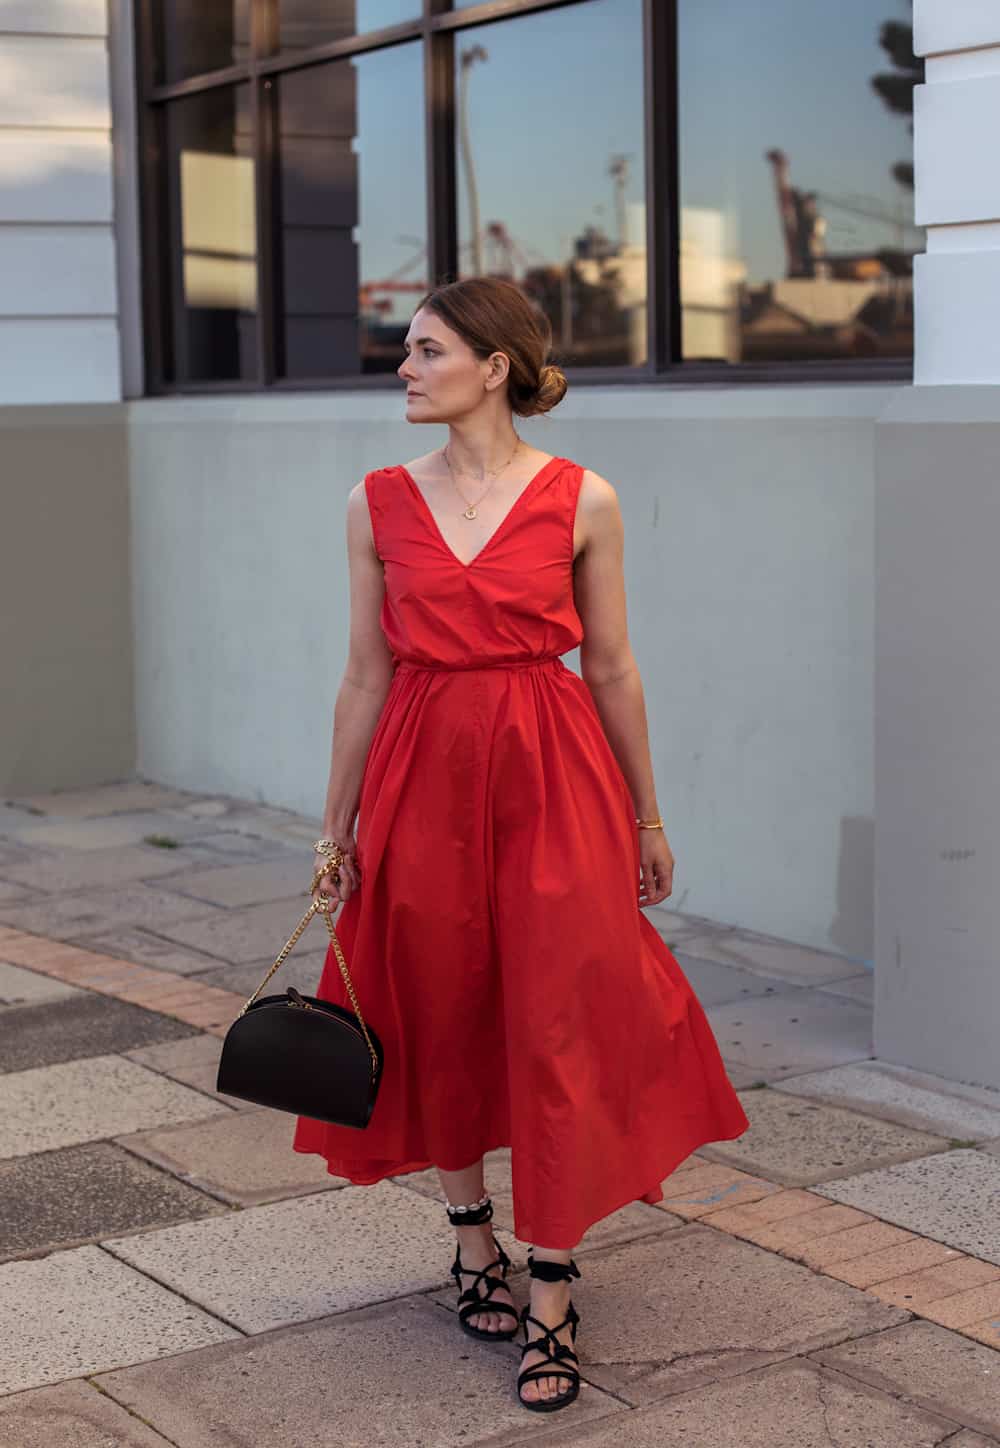 What Color Shoes To Wear With A Red Dress @inspiringwit